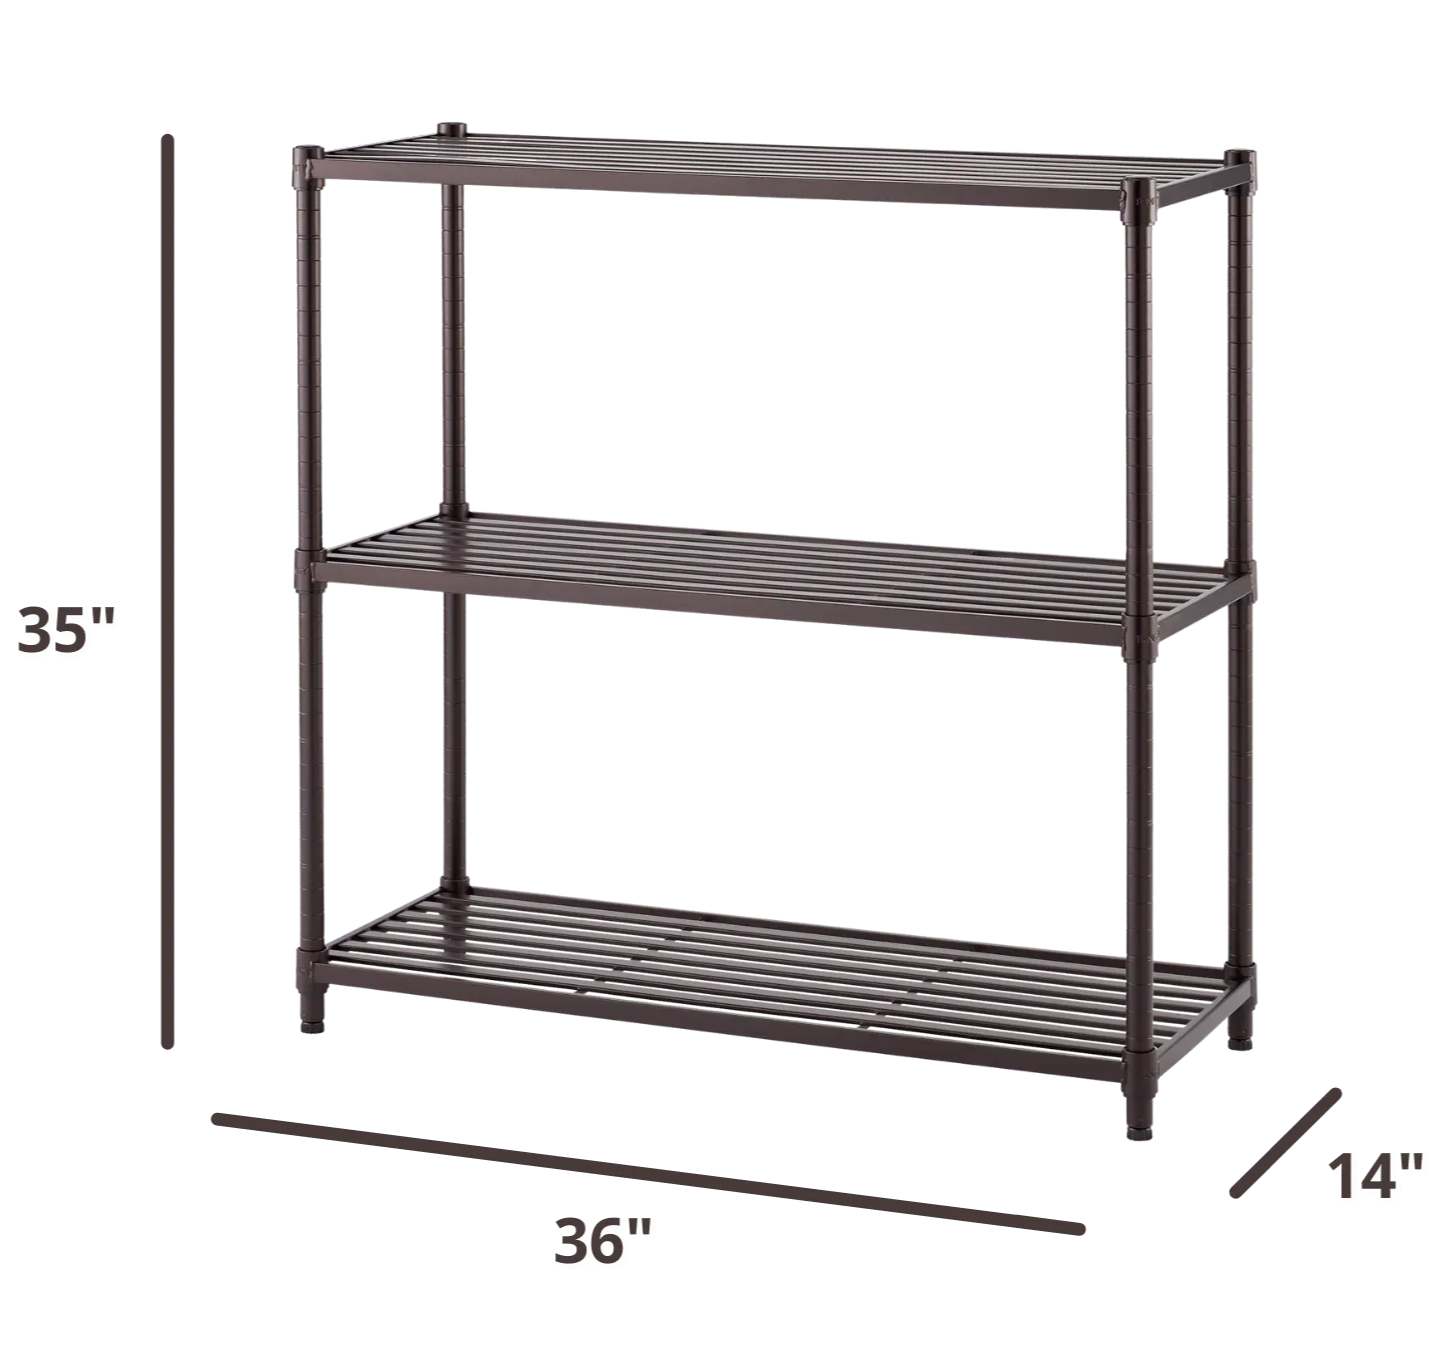 35 inches wide by 14 inches deep by 35 inches tall slat shelving rack with 3 shelves